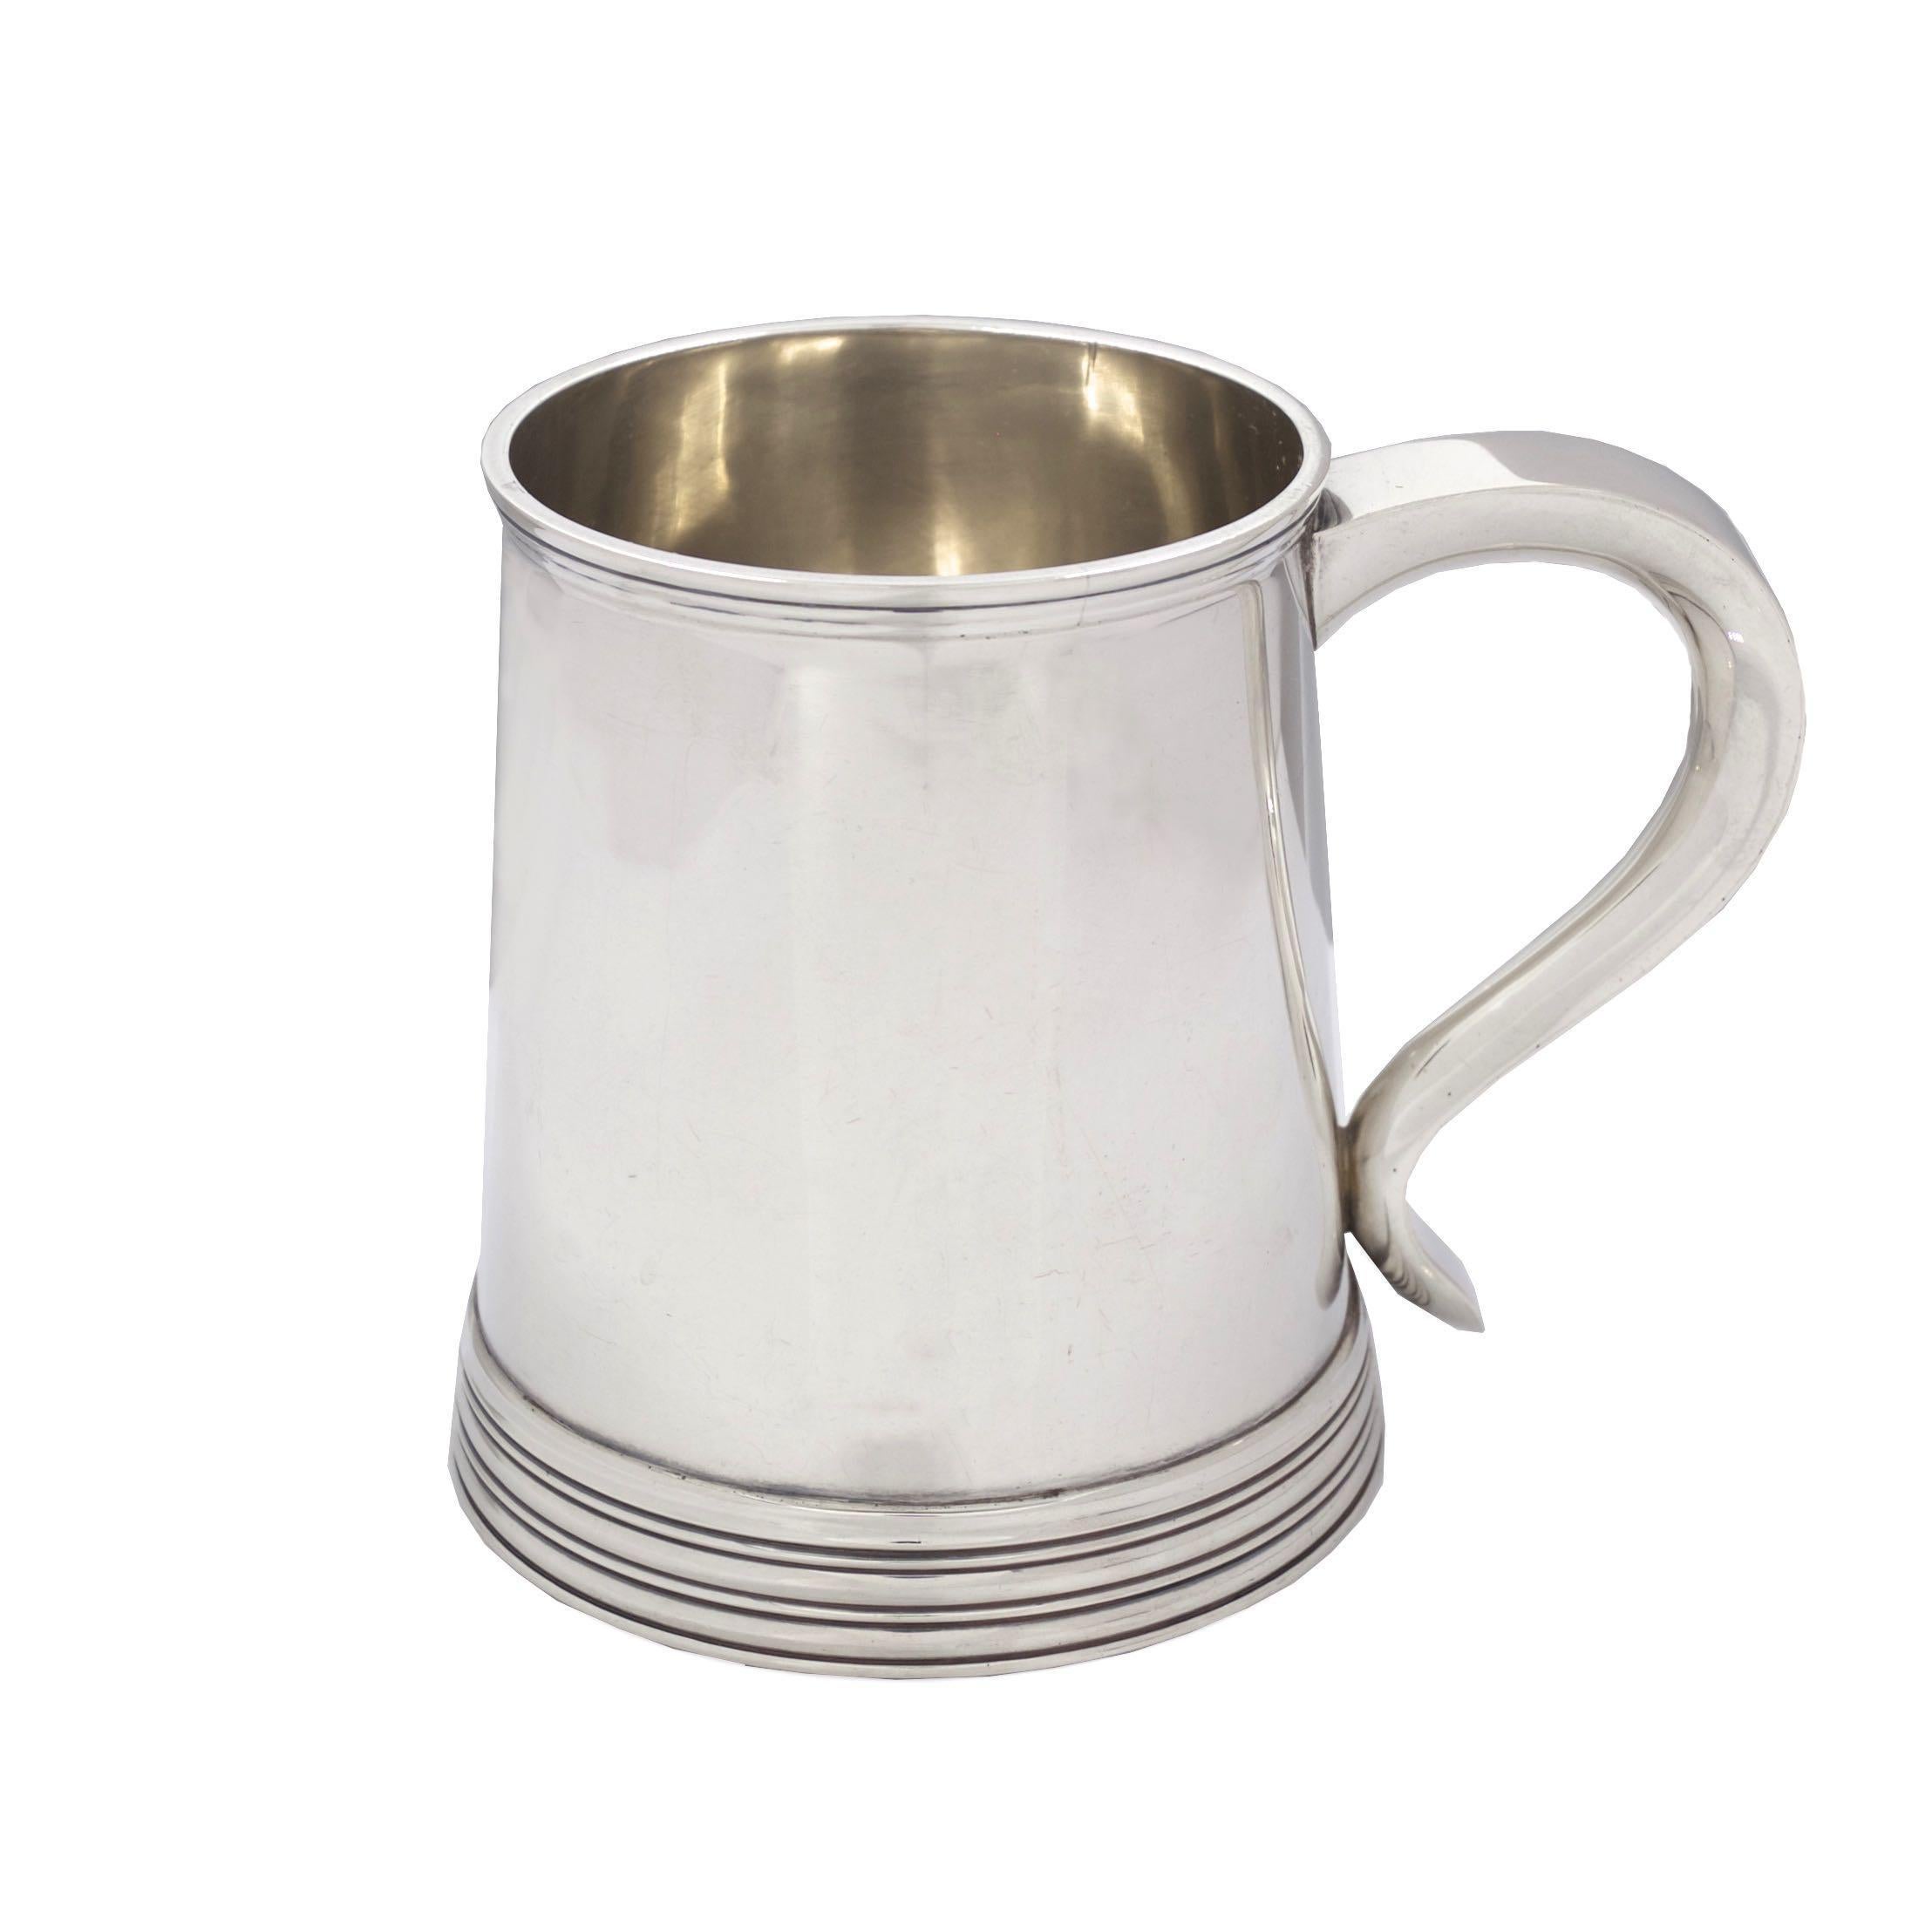 With a fine classical profile, this George III style tankard is a striking functional and decorative object. Free of any monogramming or surface alteration, it is sleek and visually interesting with an austere overall form. The maker's hallmark is